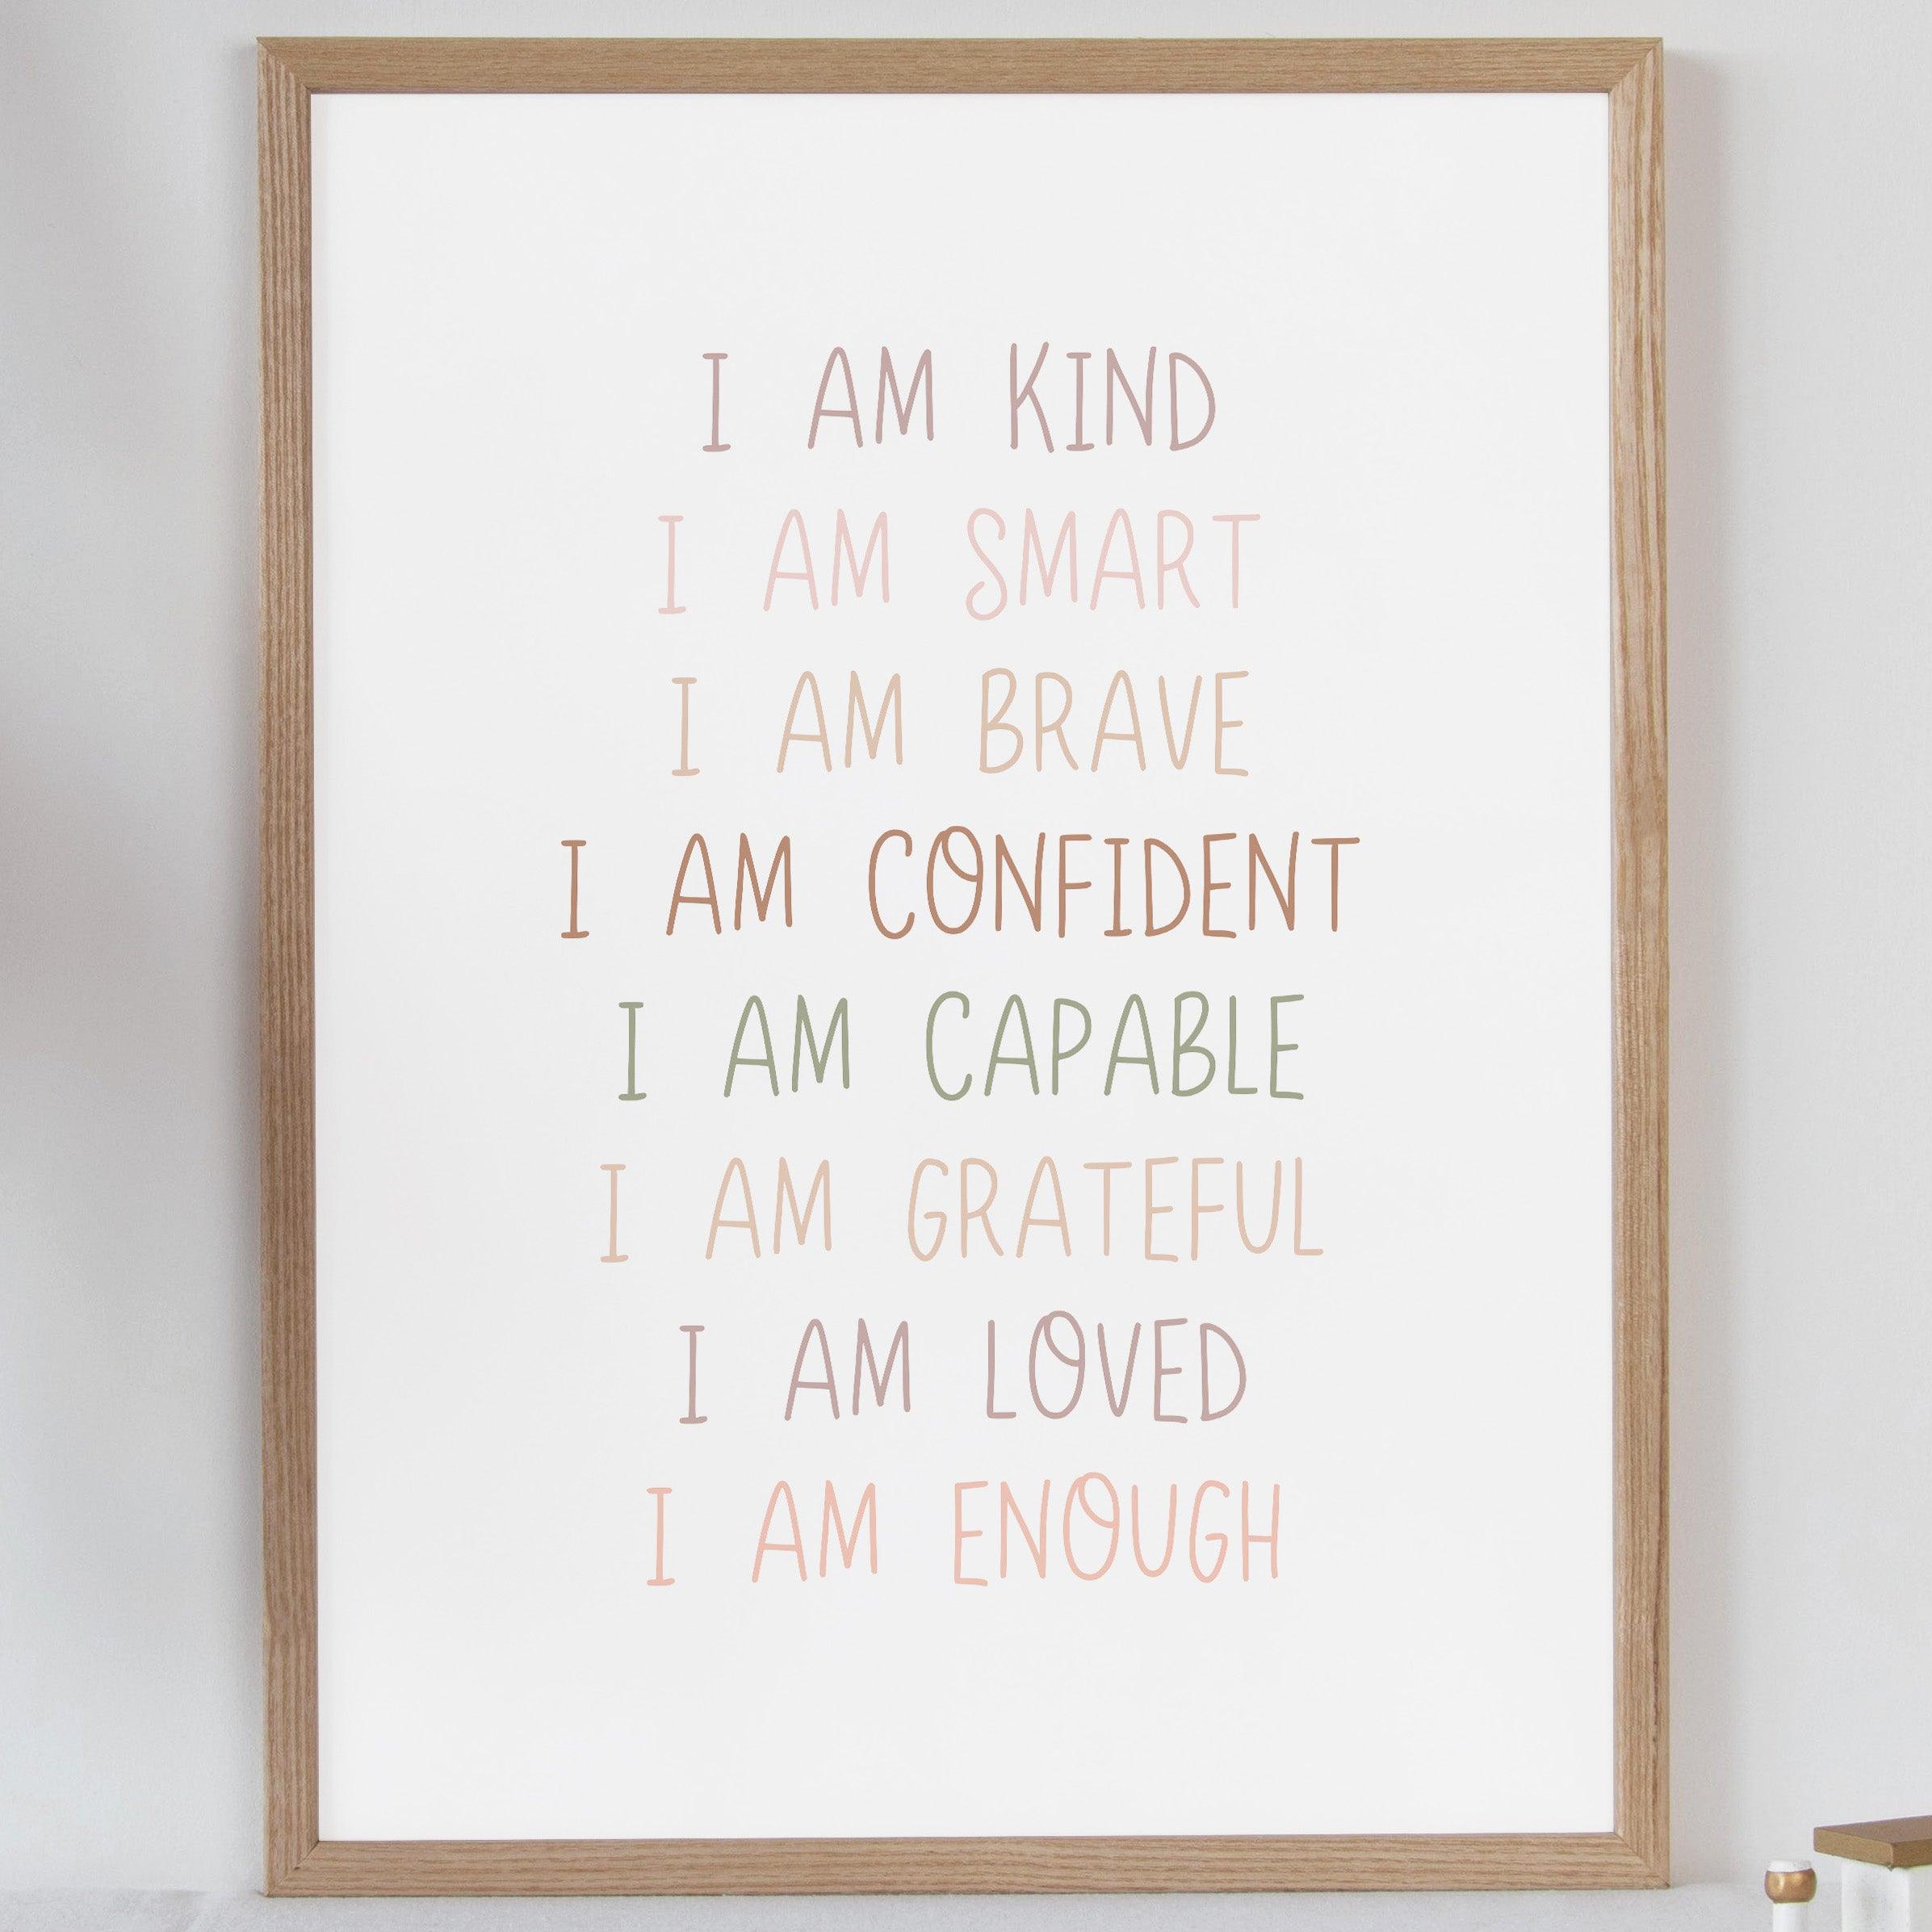 I Am Affirmation - Neutral Tones - Educational Print Series - Poster - The Willow Corner